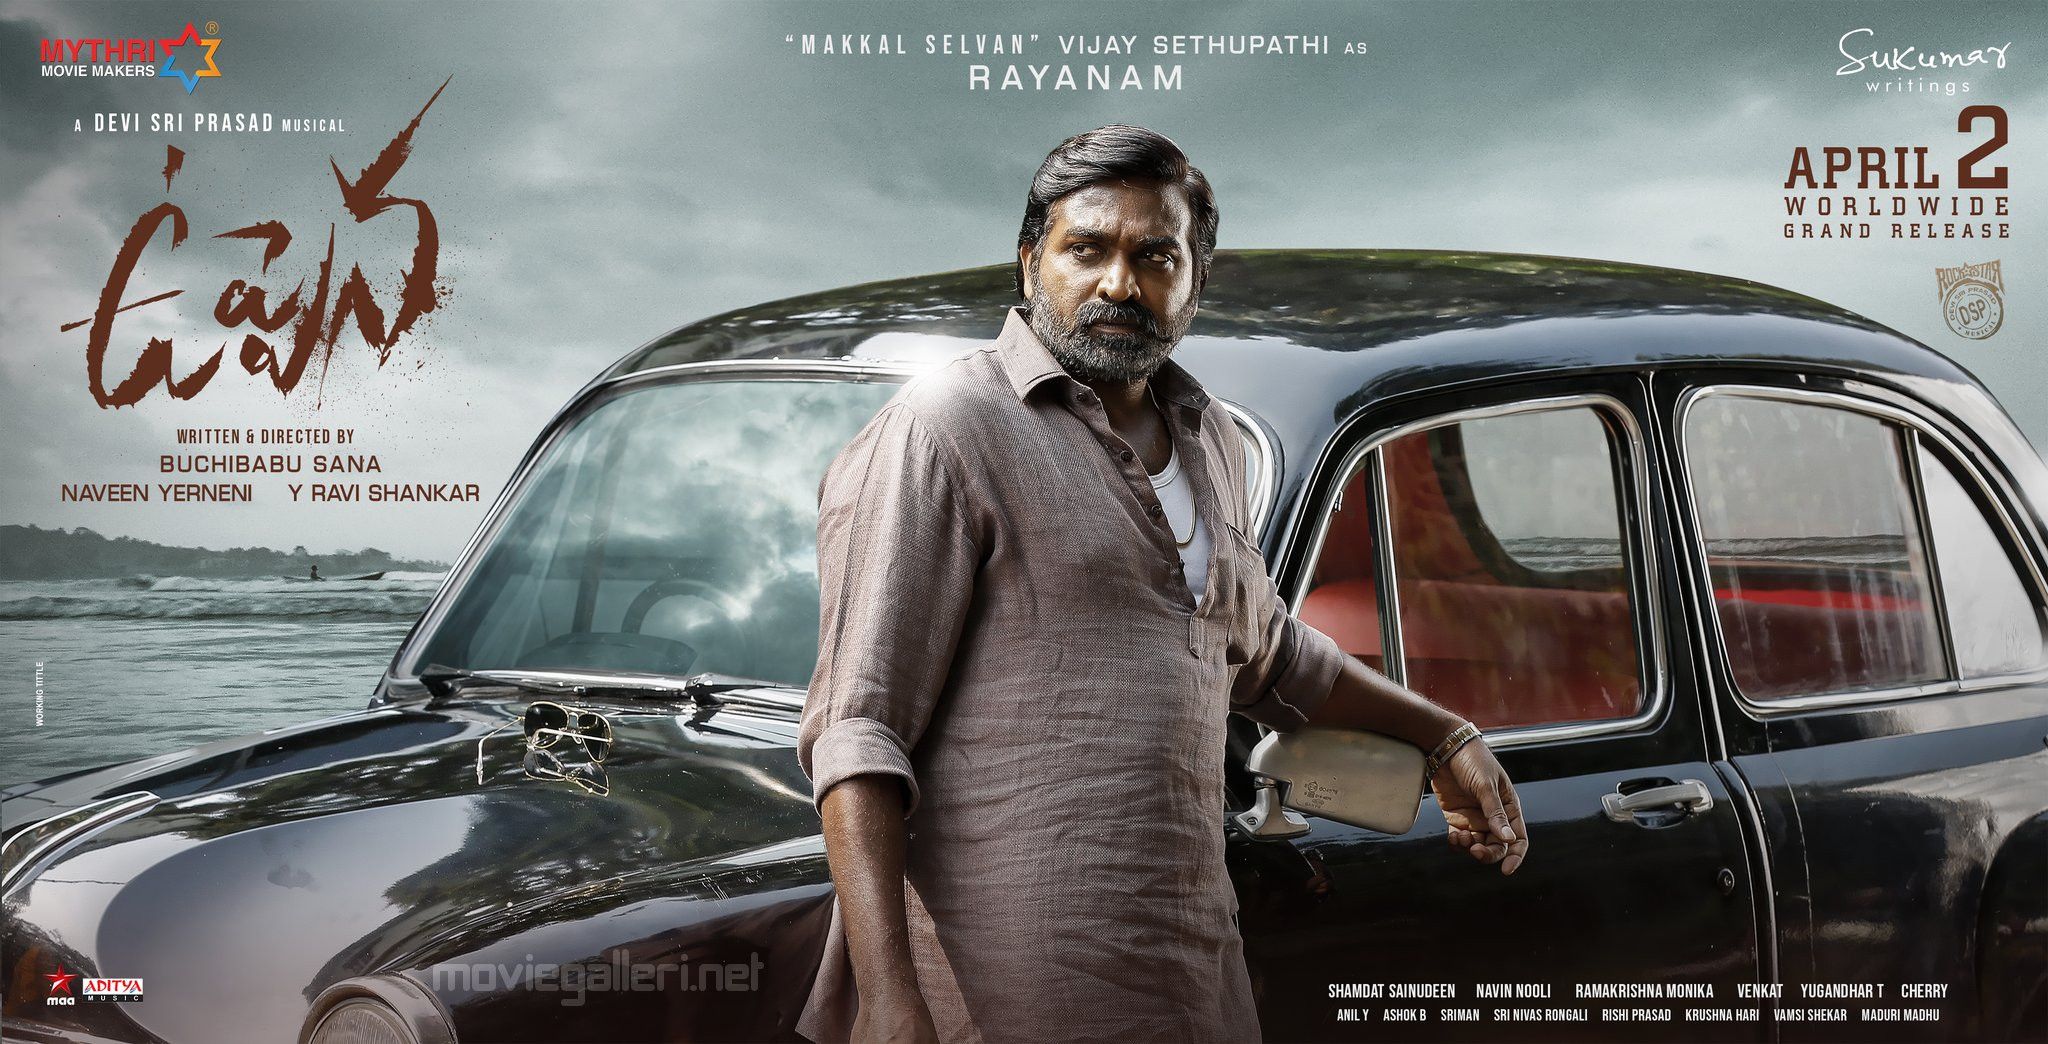 Uppena Movie Vijay Sethupathi First Look Poster Released